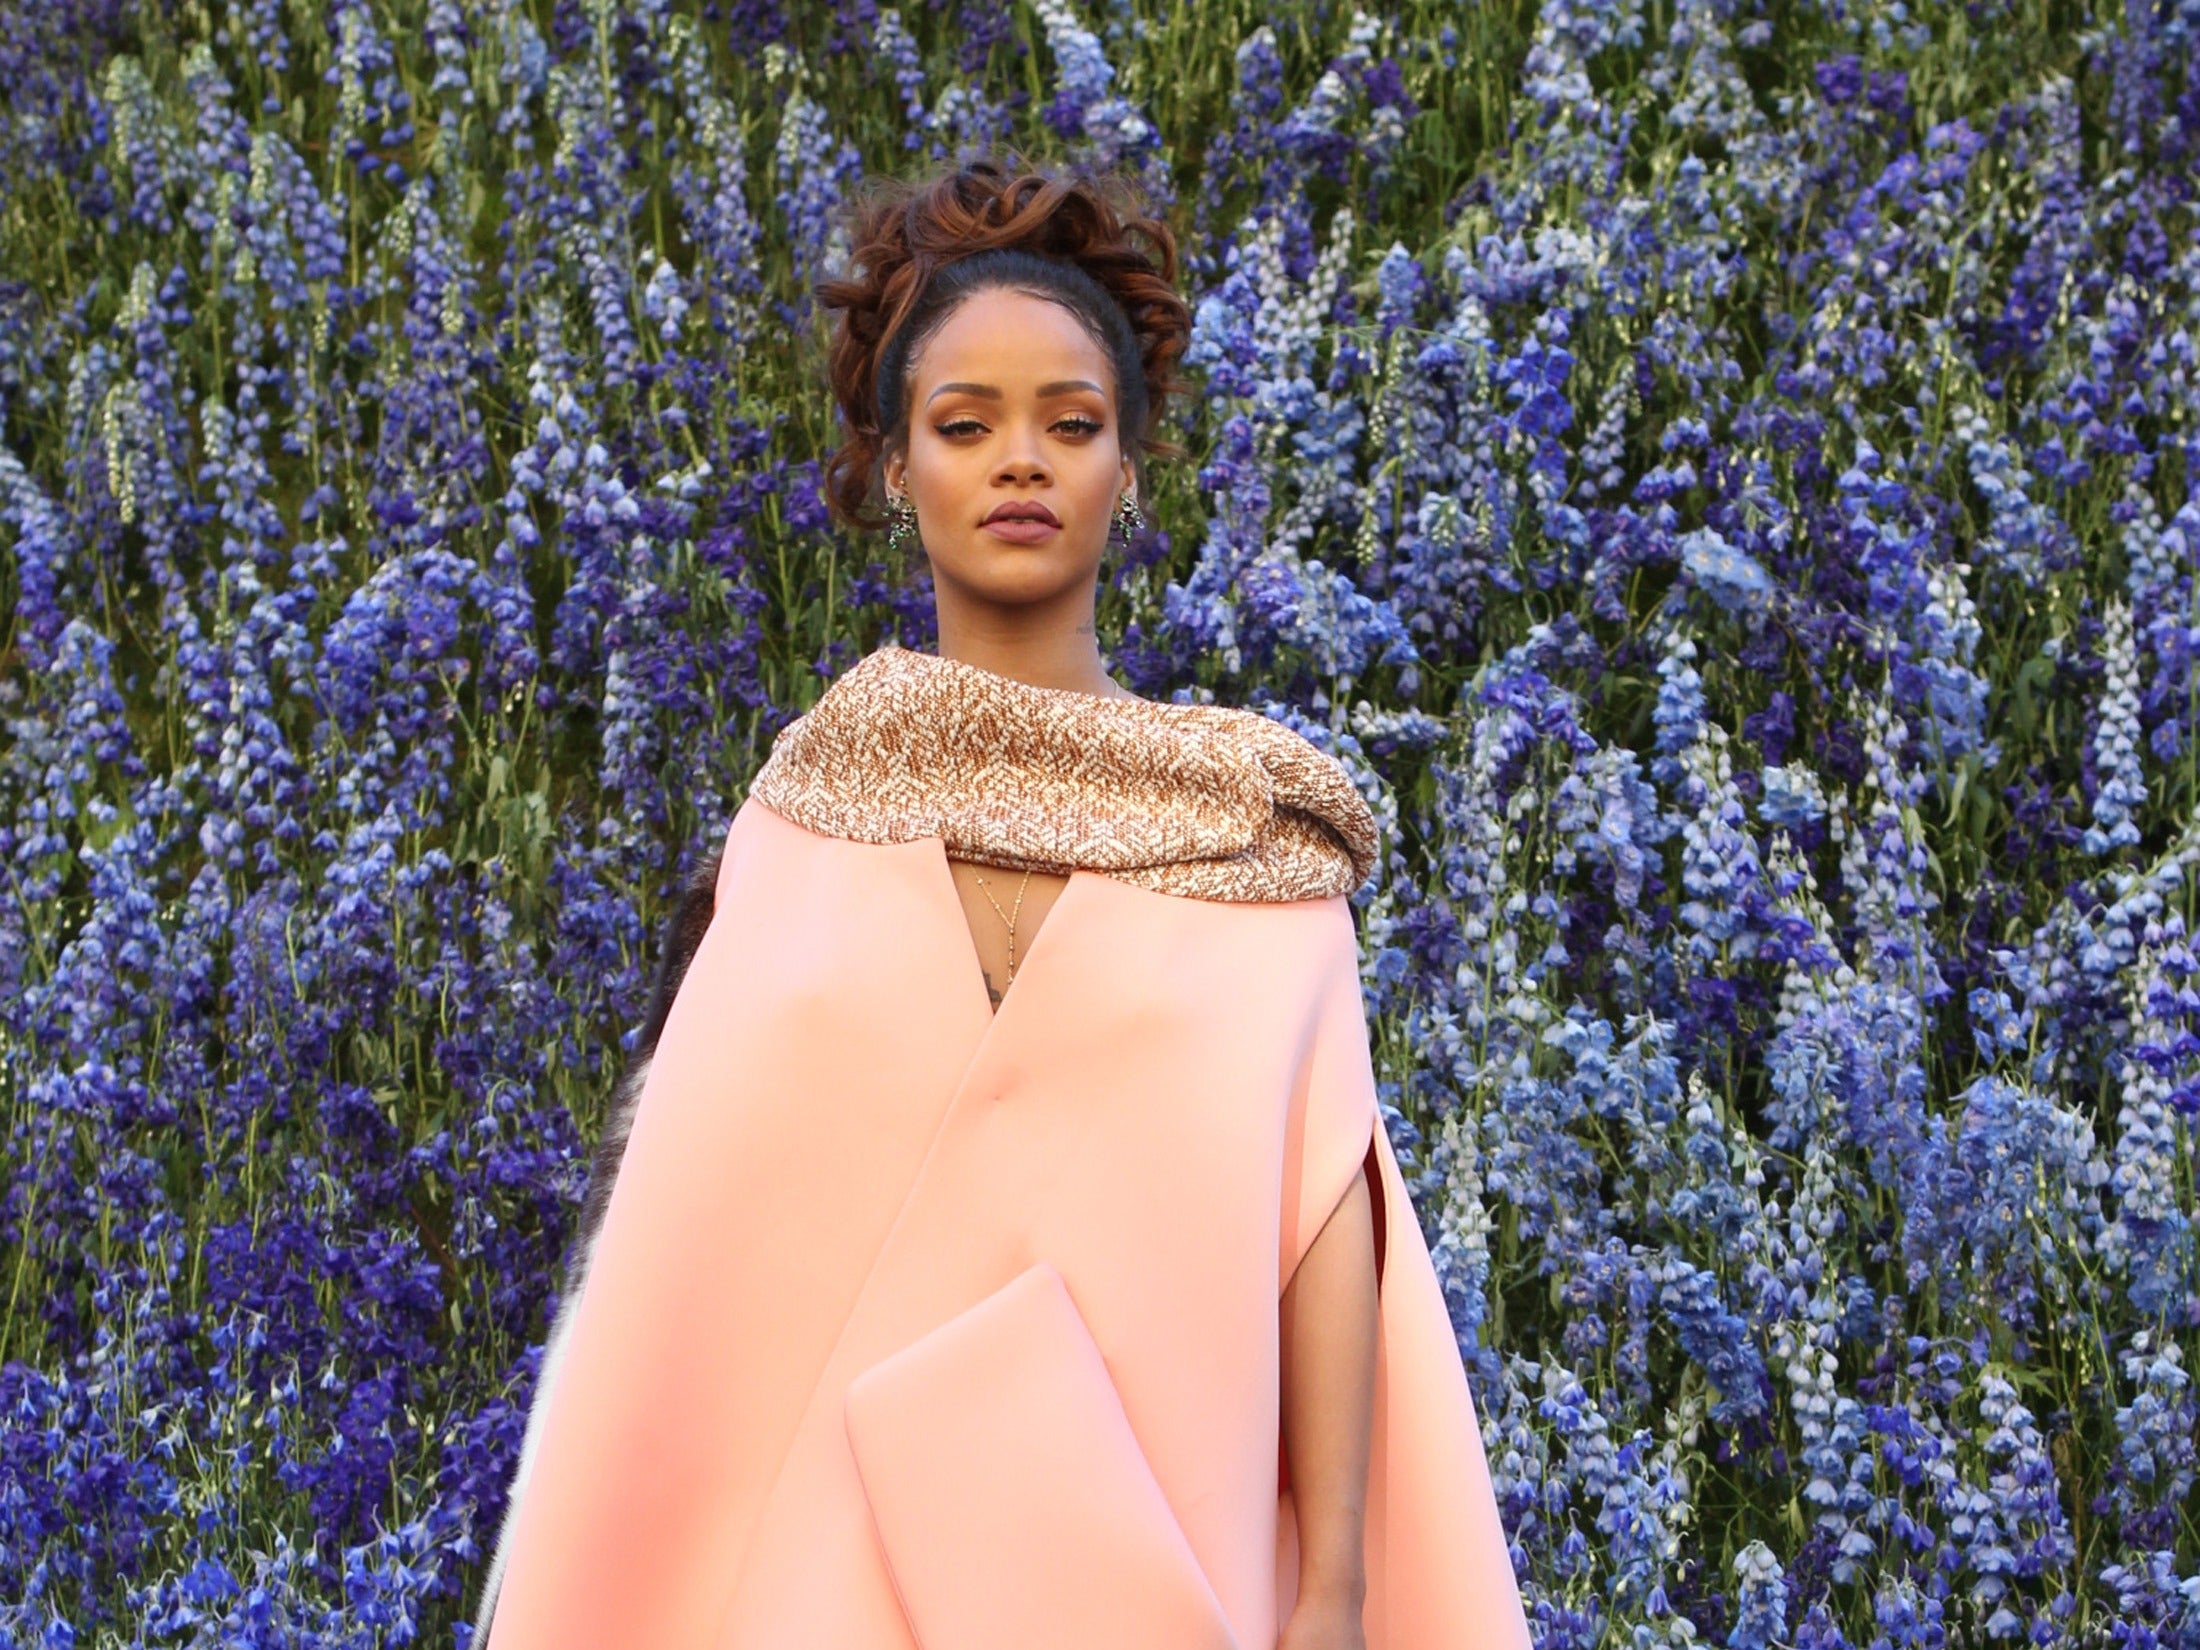  Channeling Nostalgia With This Look: Rihanna